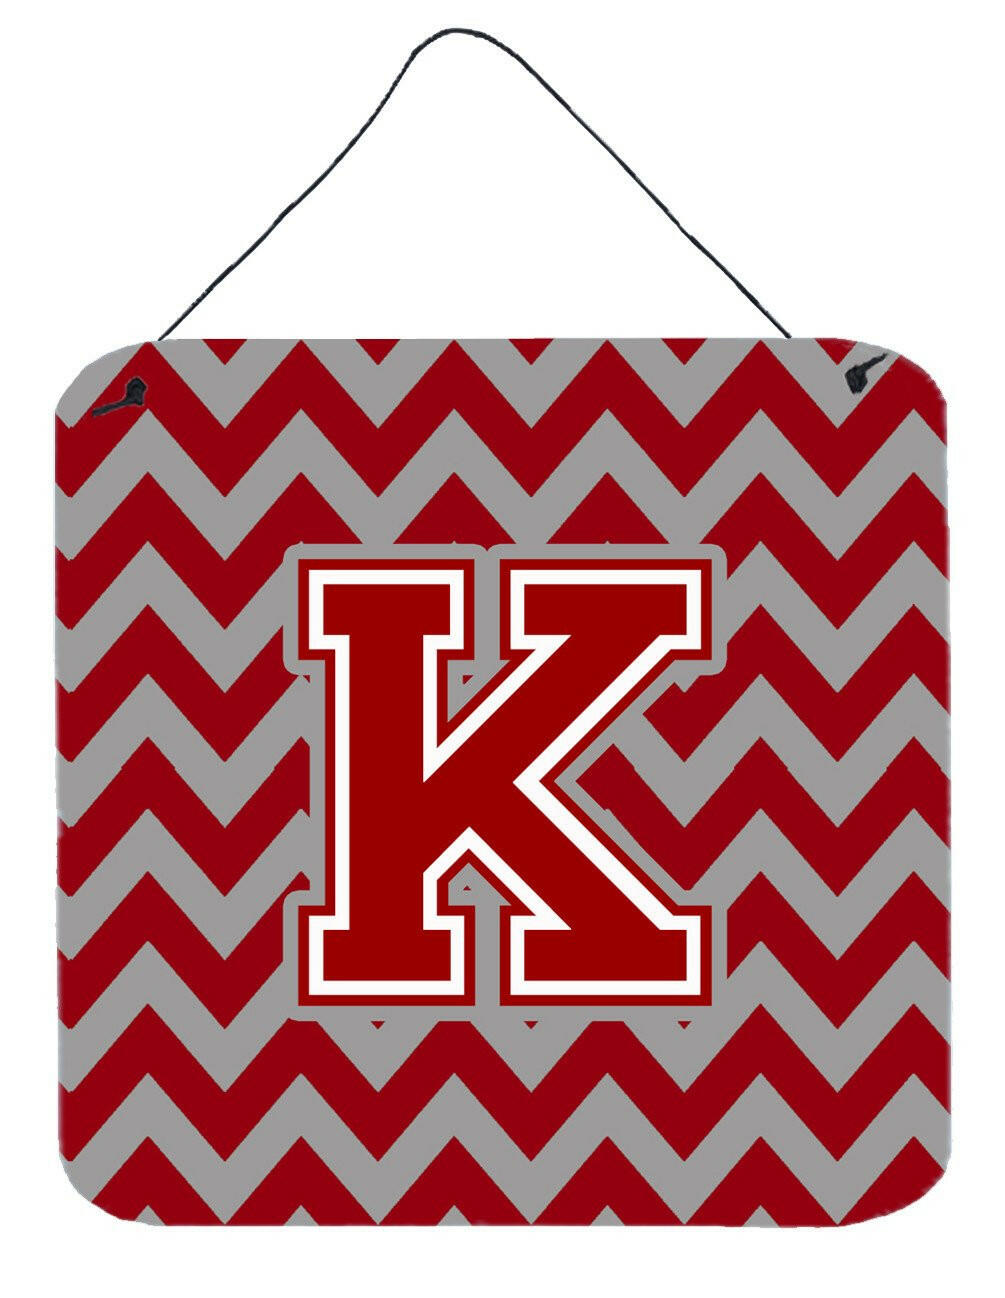 Letter K Chevron Maroon and White Wall or Door Hanging Prints CJ1049-KDS66 by Caroline's Treasures